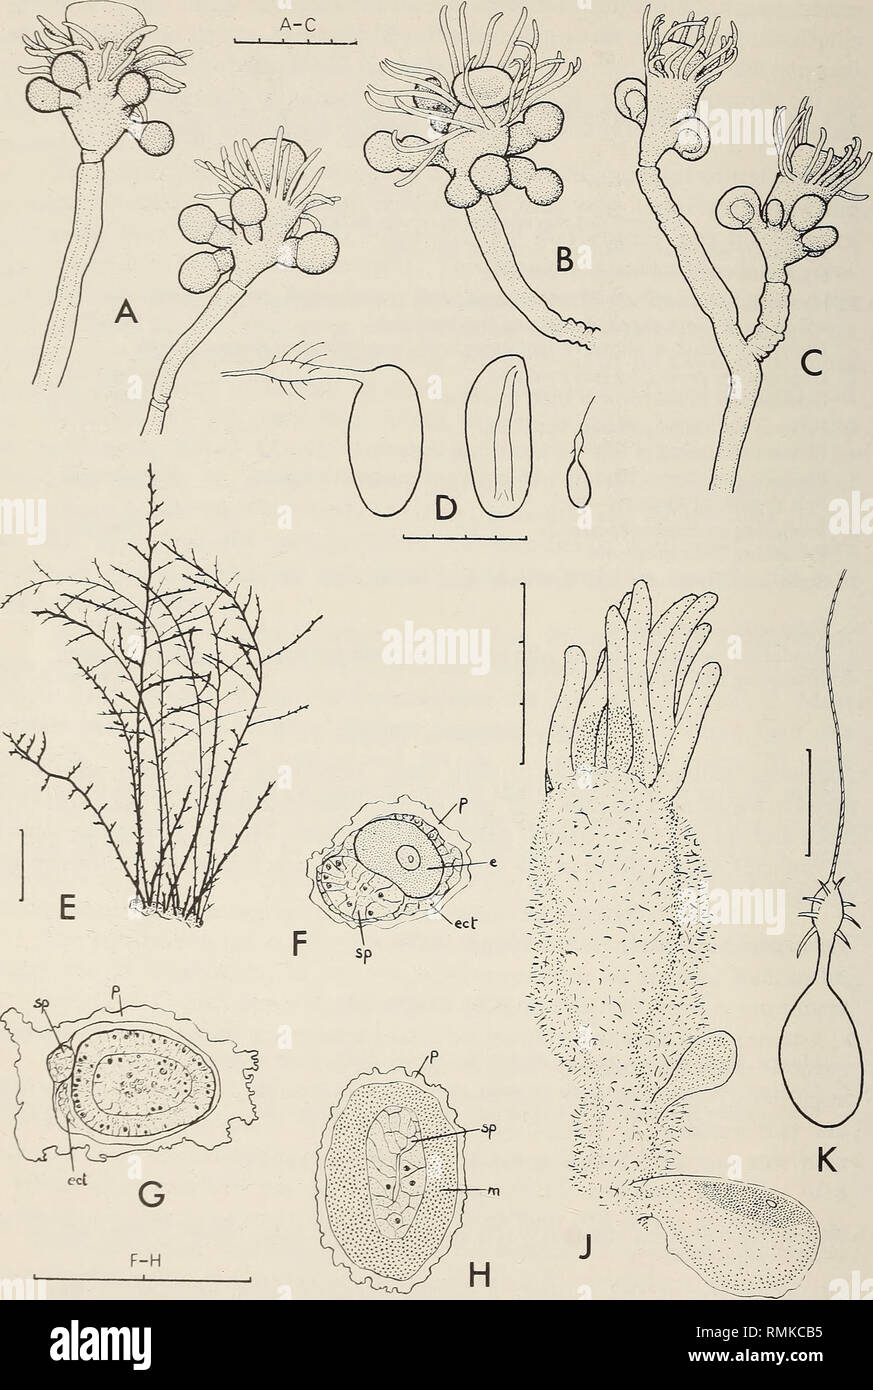 . Annals of the South African Museum = Annale van die Suid-Afrikaanse Museum. Natural history. 92 ANNALS OF THE SOUTH AFRICAN MUSEUM. Fig. 31. Eudendrium ramosum. A and B, male blastostyles; C, young female blastostyles; D, nemato- cysts, from left to right large microbasic eurytele discharged and undischarged, a small microbasic eurytele. Bimeria fluminalis. E, part of colony; F, t.s. female gonophore with egg; G, t.s. female gonophore with planula; H, t.s. male gonophore; J, hydranth and two young female gonophores, one with an egg; K, microbasic eurytele. Abbreviations: e: egg; ect: ectoder Stock Photo